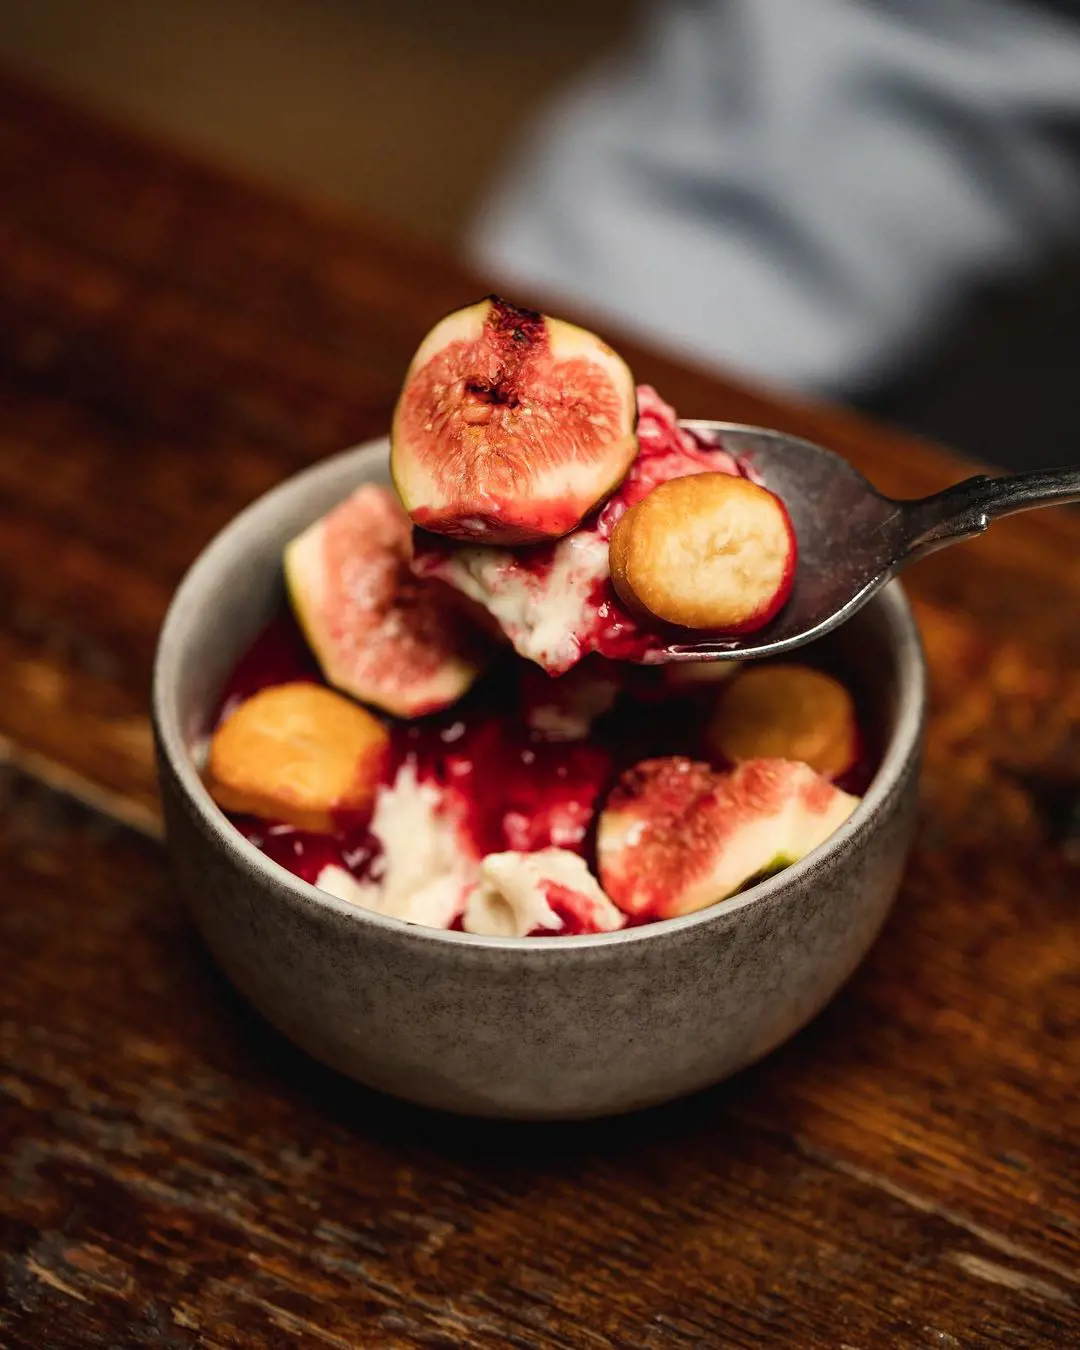 rice pudding with cherry compote, mini beignet and fresh figs